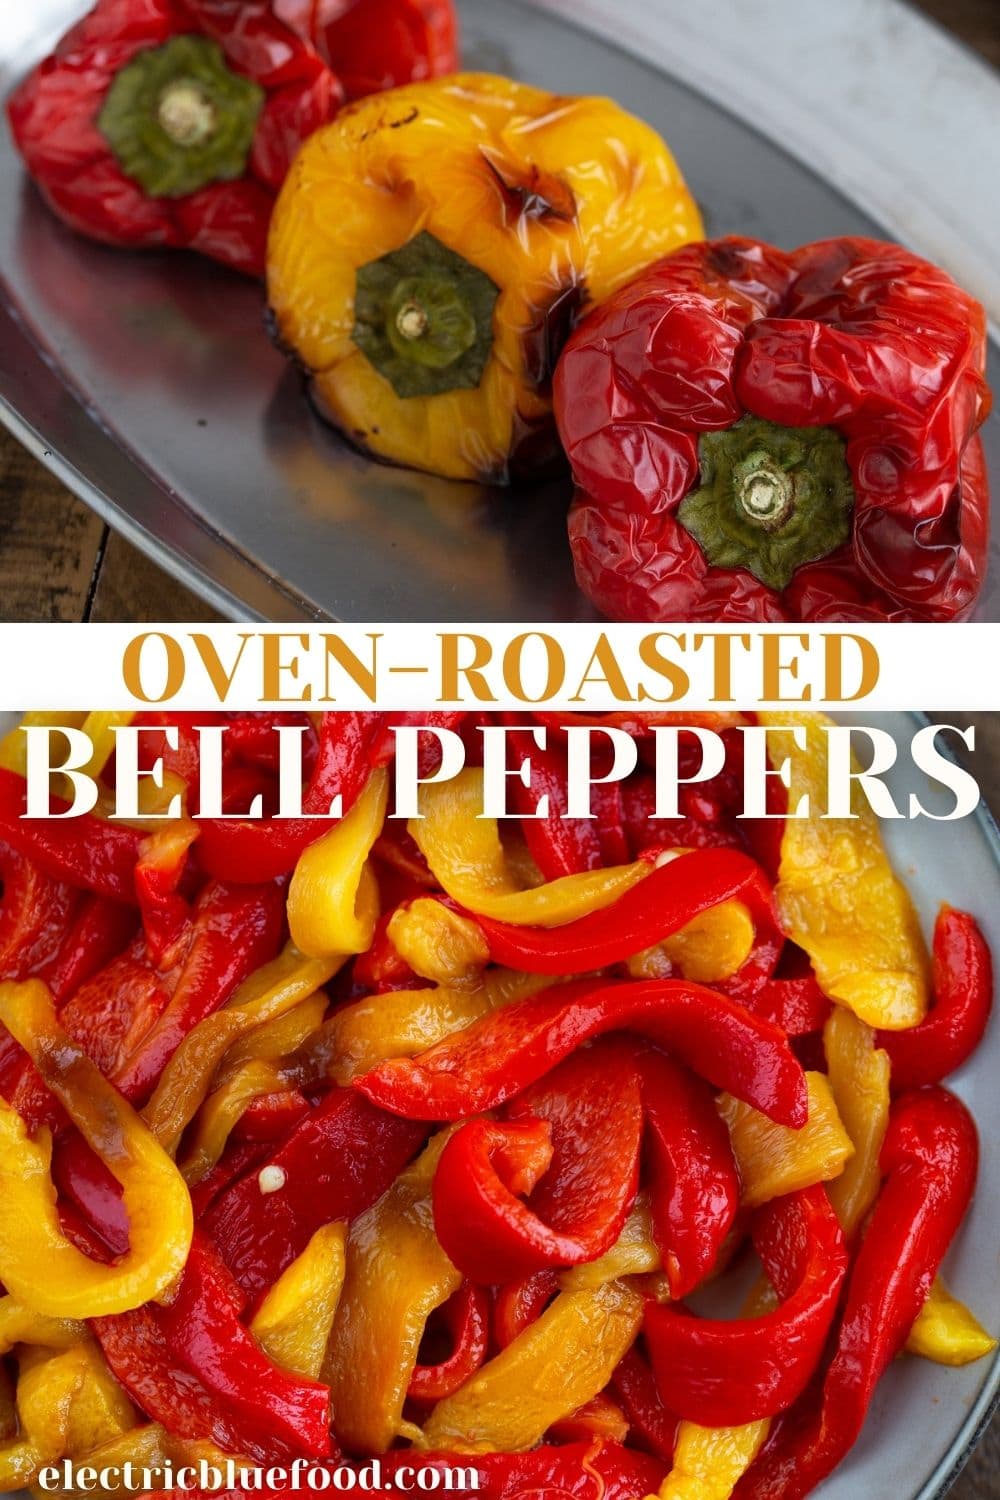 Oven-roasted bell peppers, great both au naturel or with olive oil to serve as side dish or to use as ingredient in salads, pasta, as pizza topping and more.